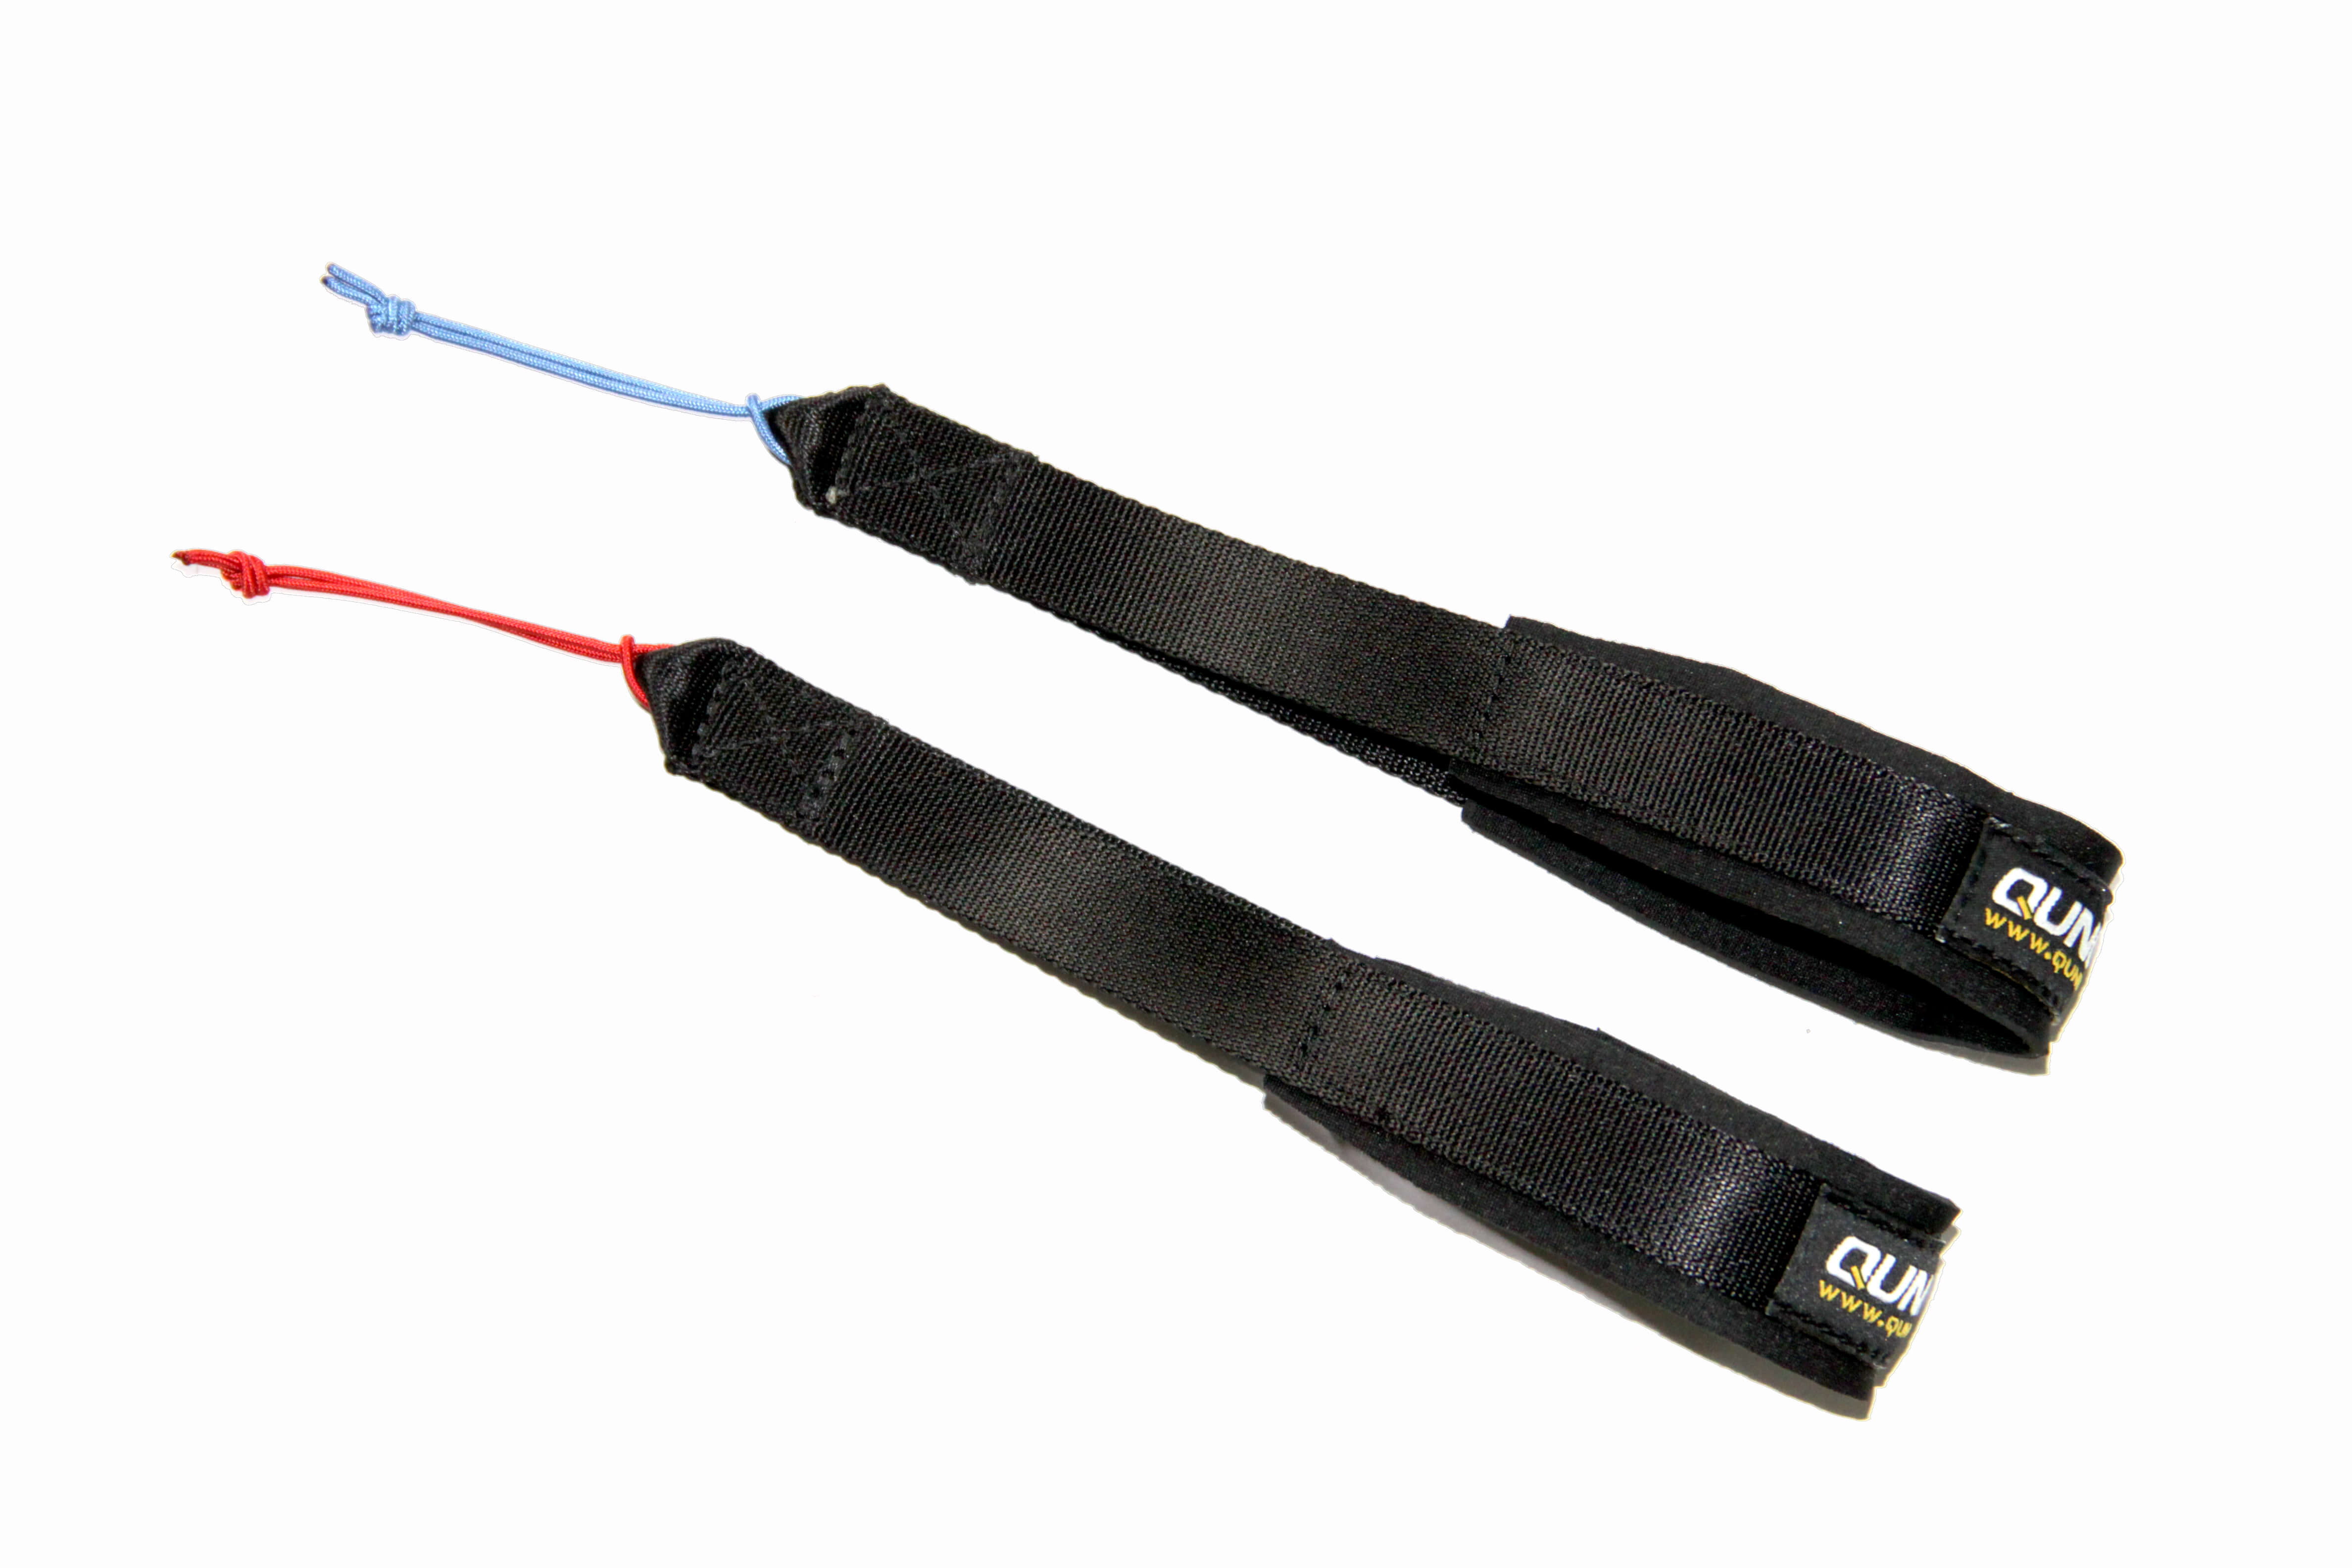 Wrist Strap for Basic Dual Line Traction Kite